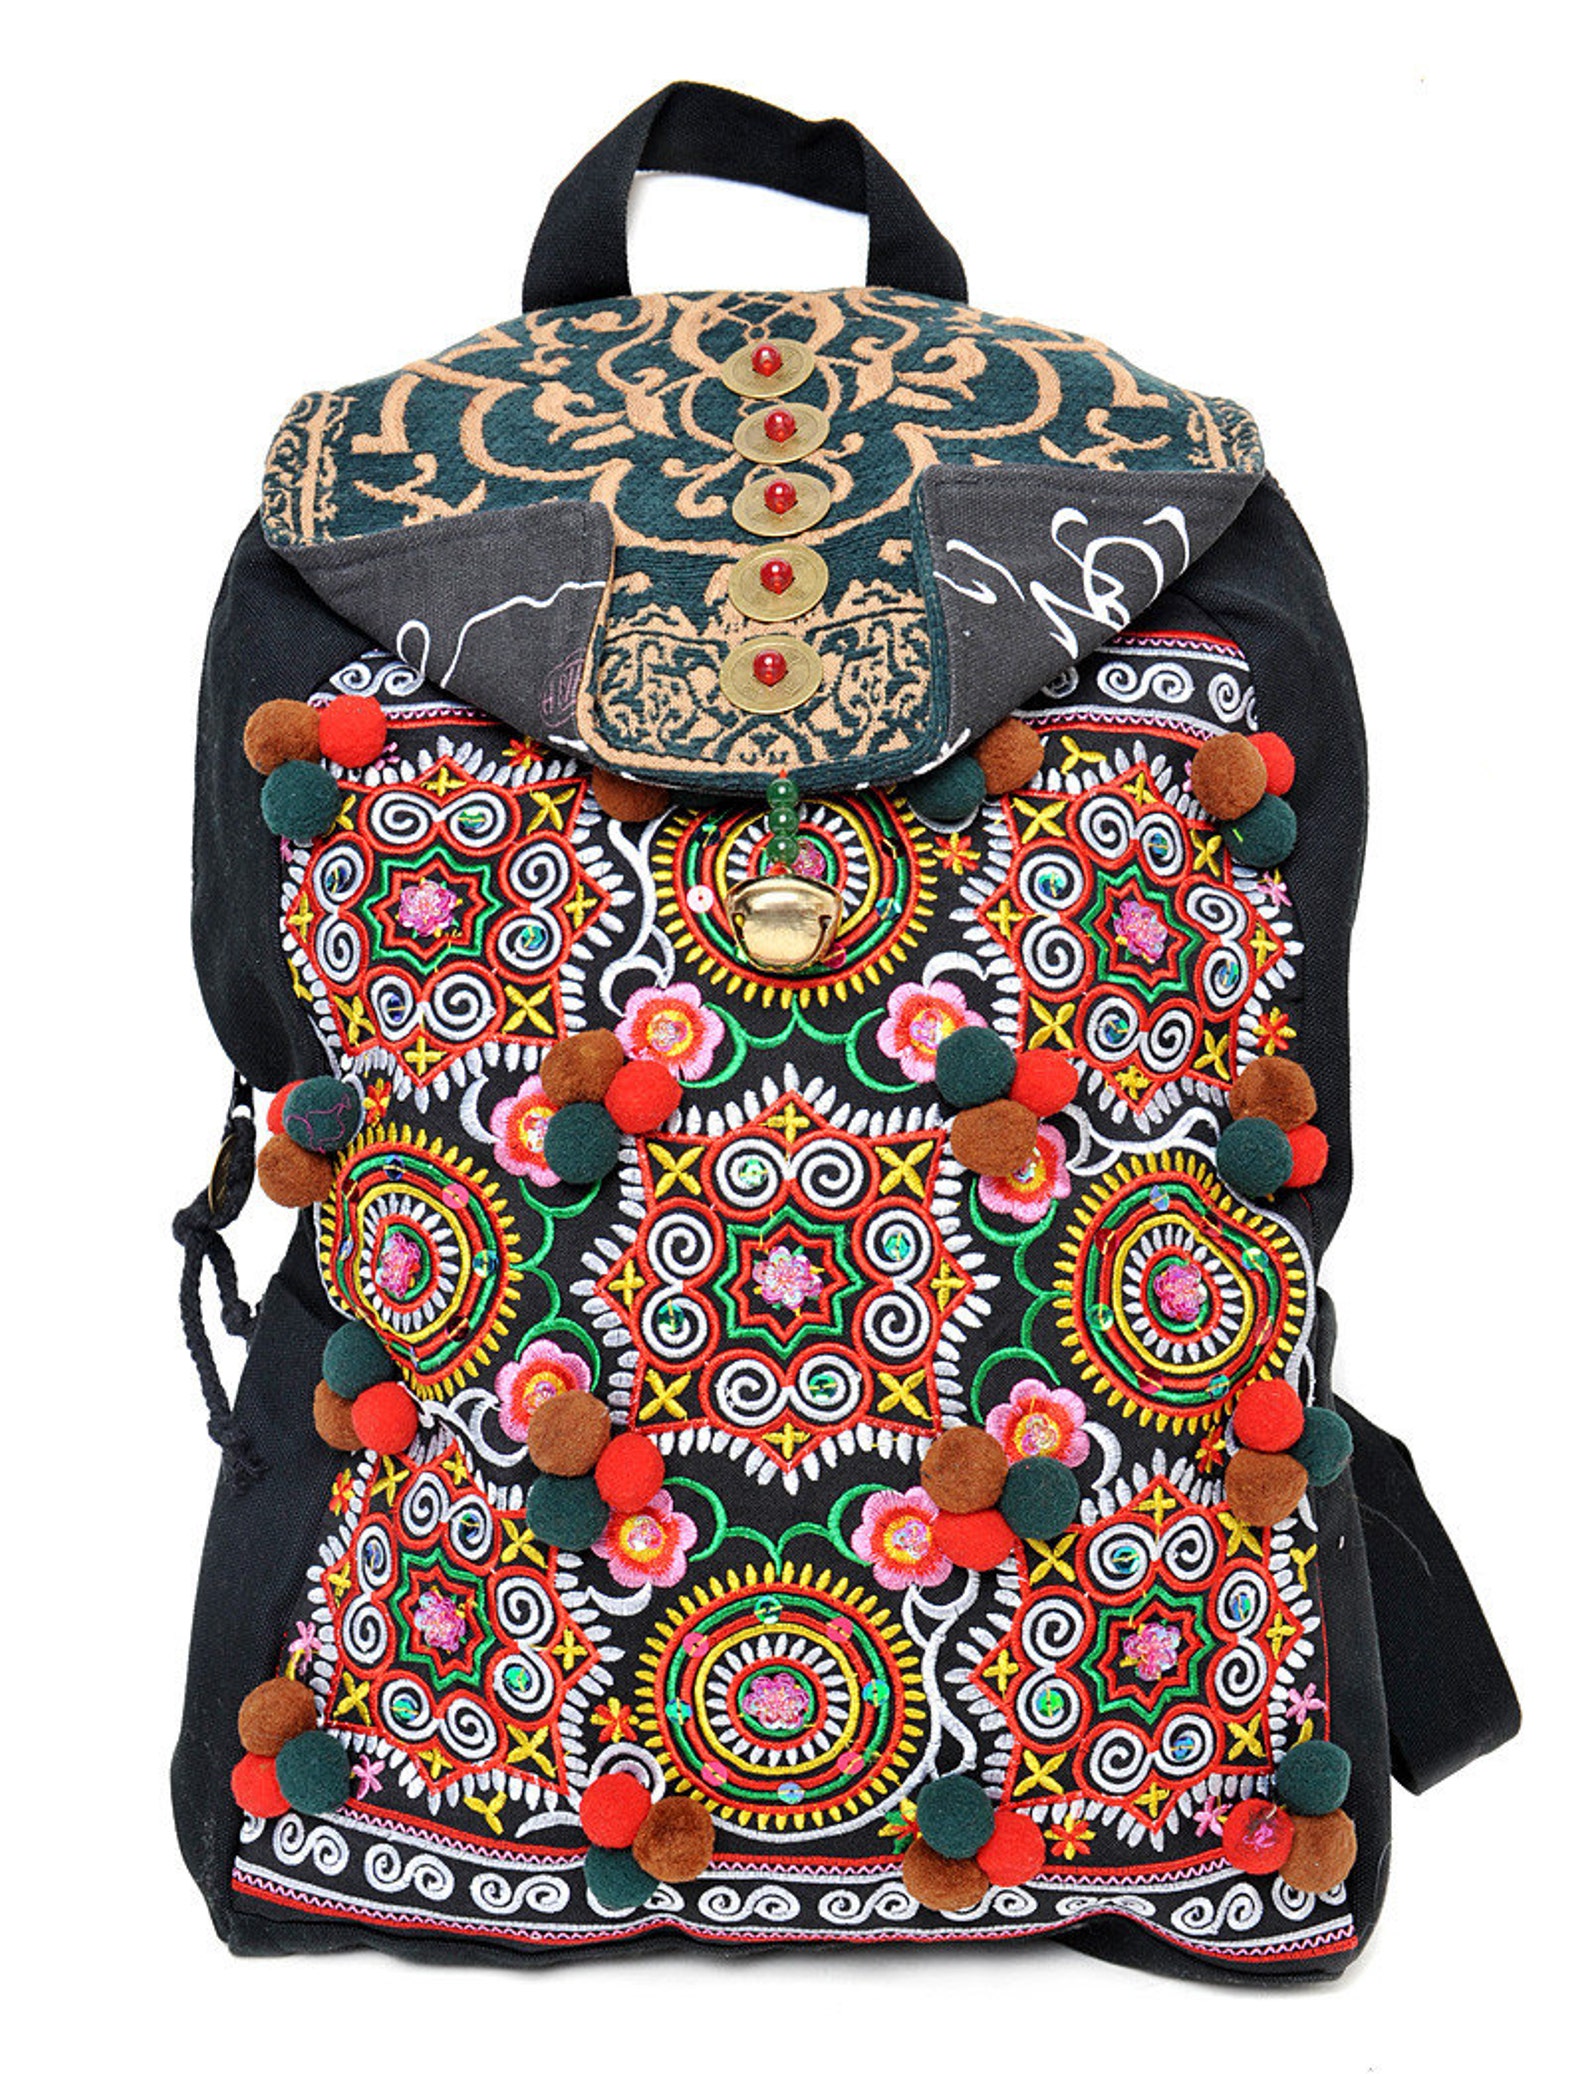 Backpack Hmong Tribal Style With Vintage Embroidered Piece Etsy